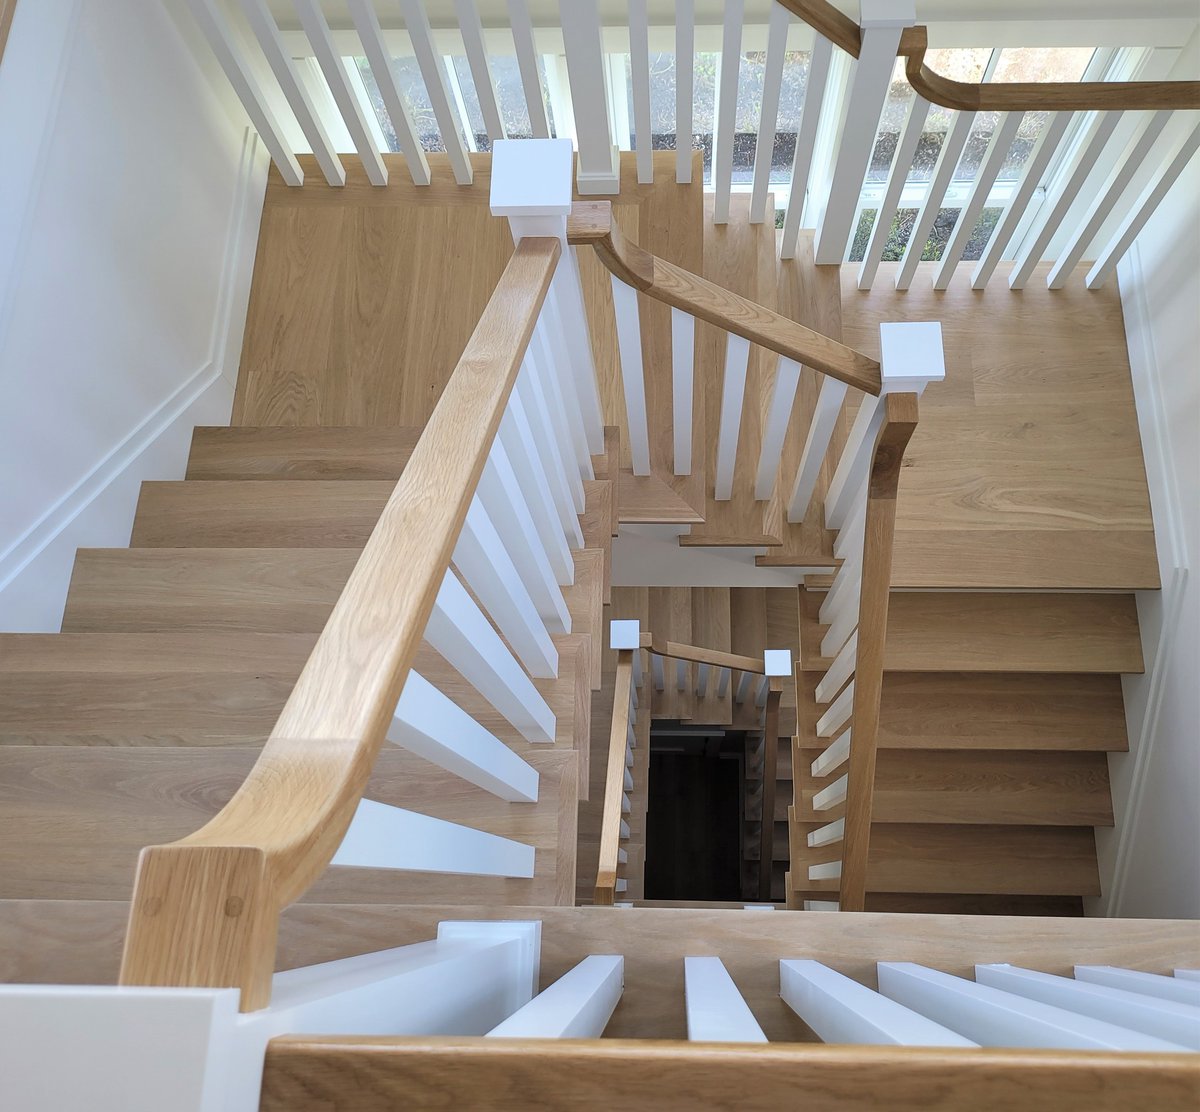 A stairway can be an absolute showstopper even if it isn’t overly ornate.
#CapeCod #NewEnglandArchitecture #ERTADesigned #LifeWellDesigned #StairDesign #DennisMA #Millwork